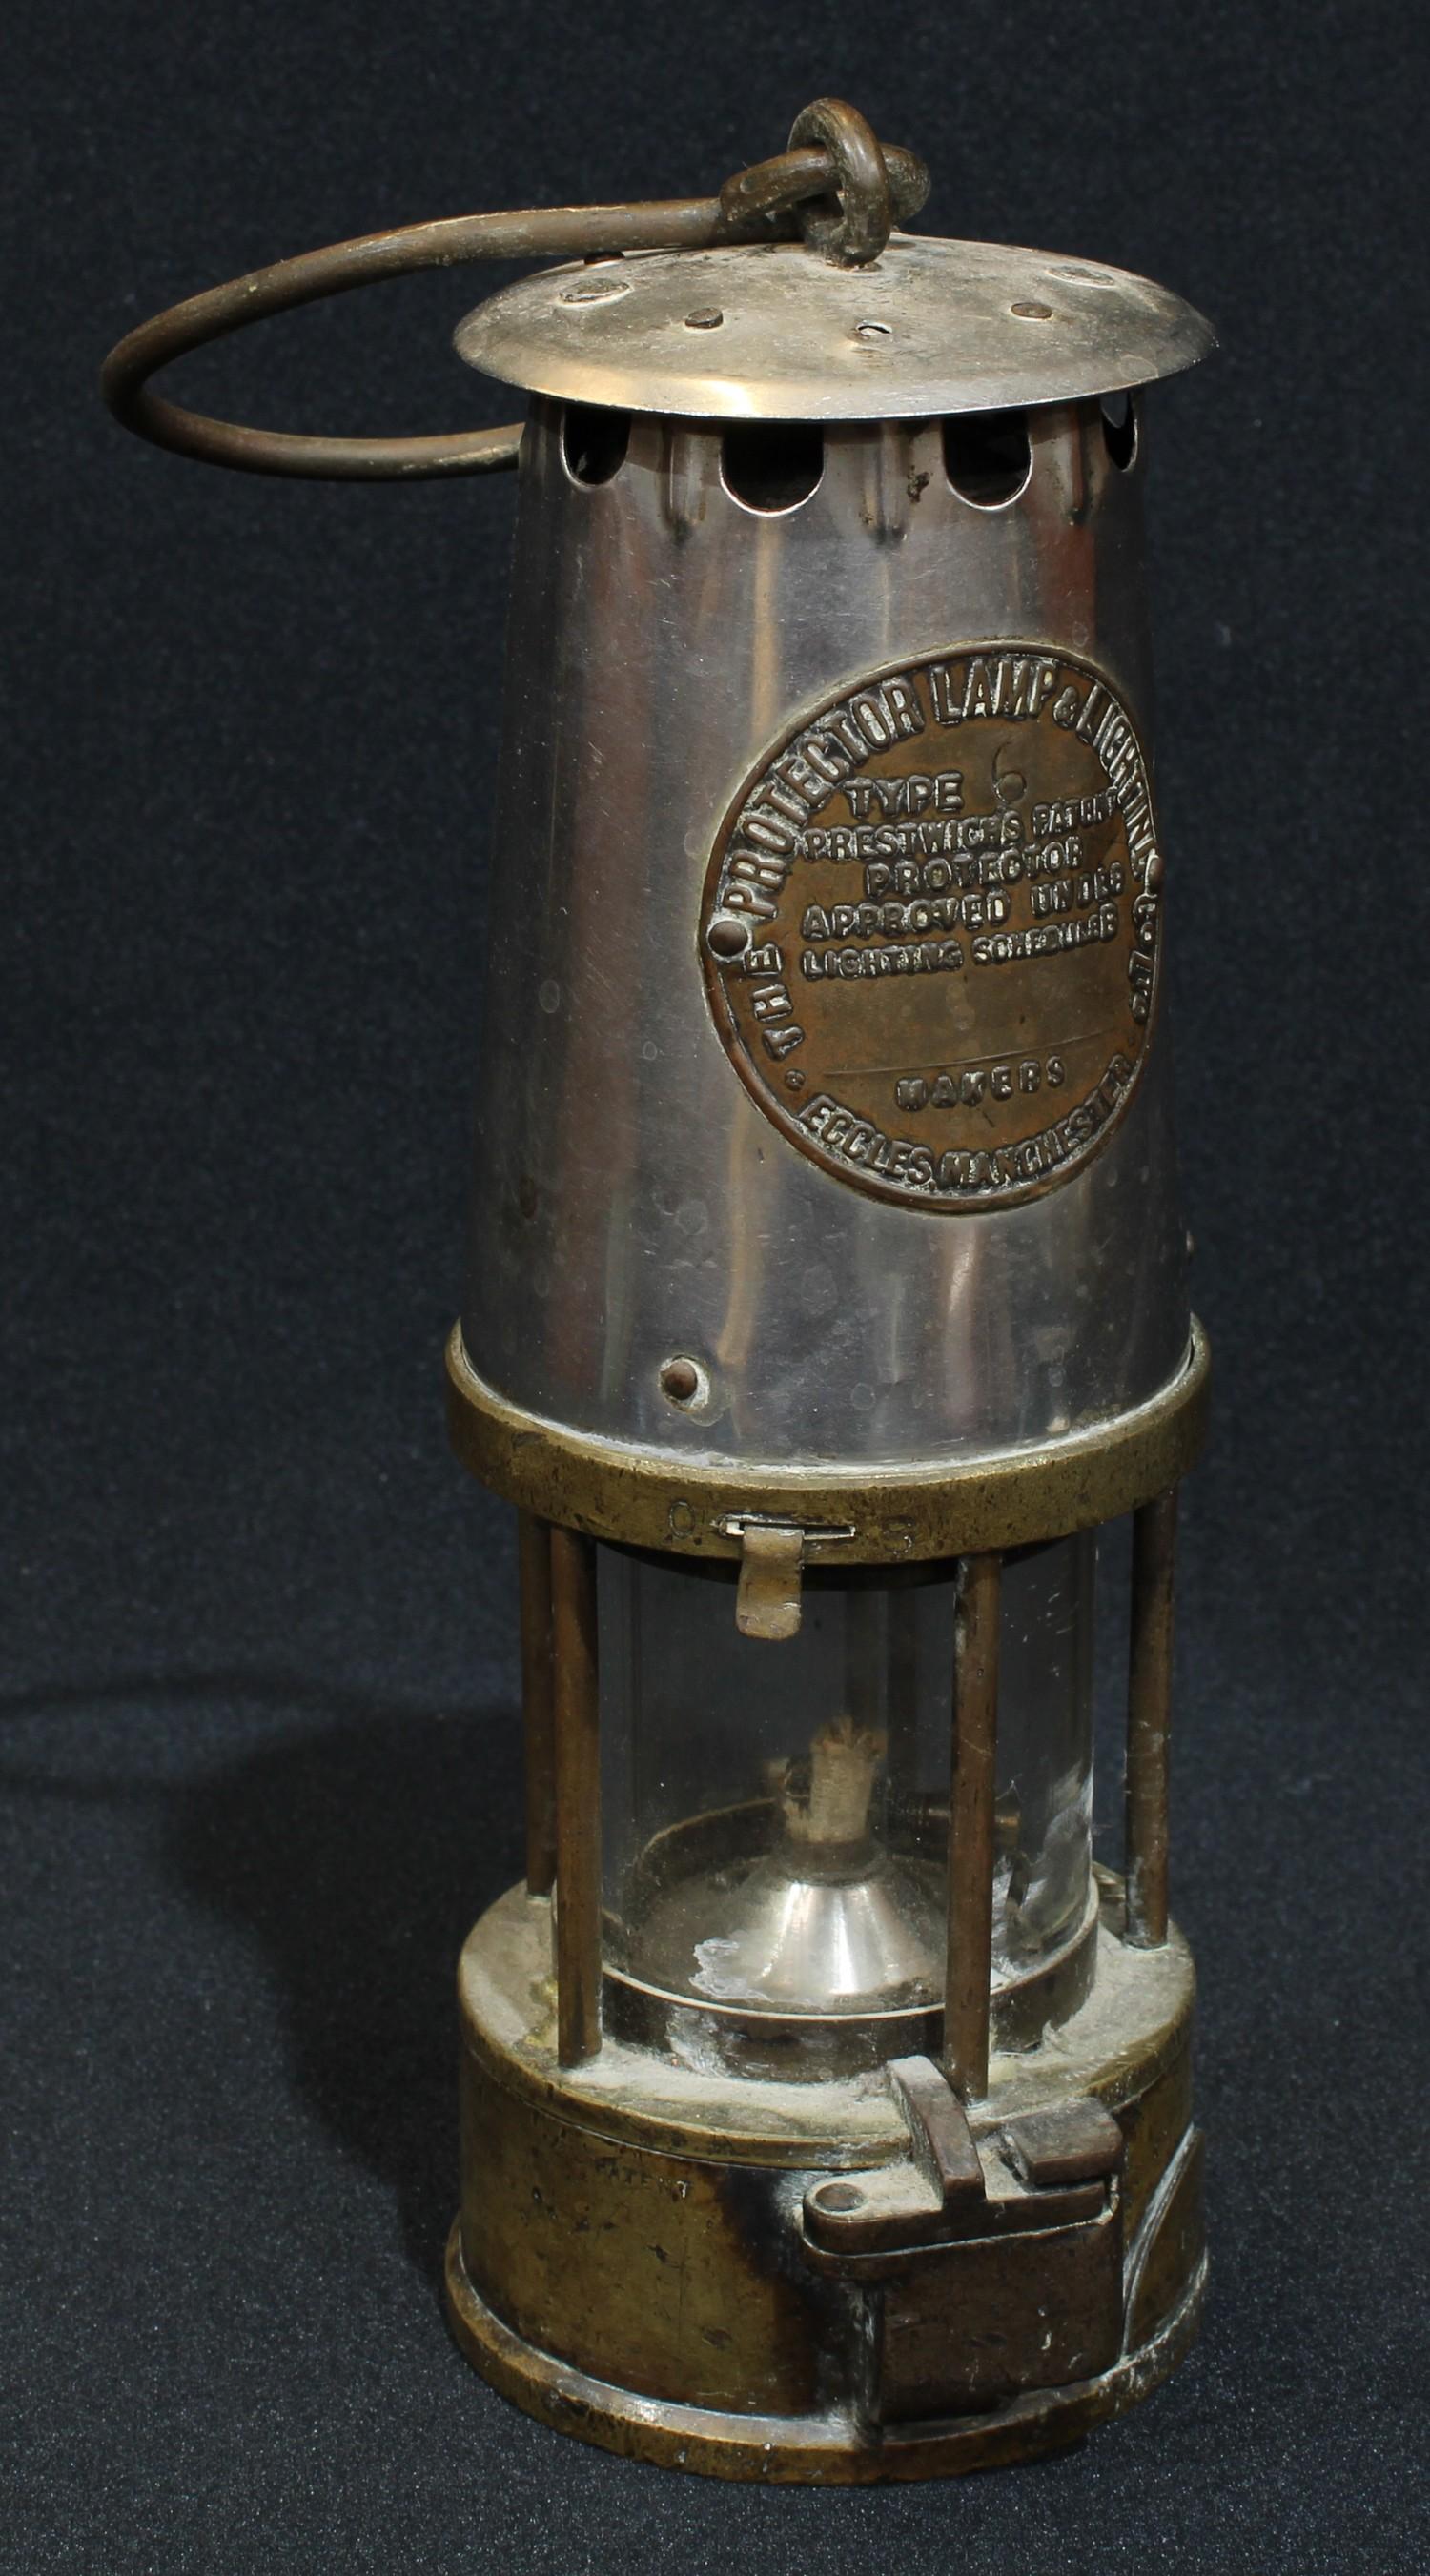 A miner's safety lamp, Protector Lamp and Lighting Co. Ltd., Eccles, Manchester, Type 6 - Bild 2 aus 3